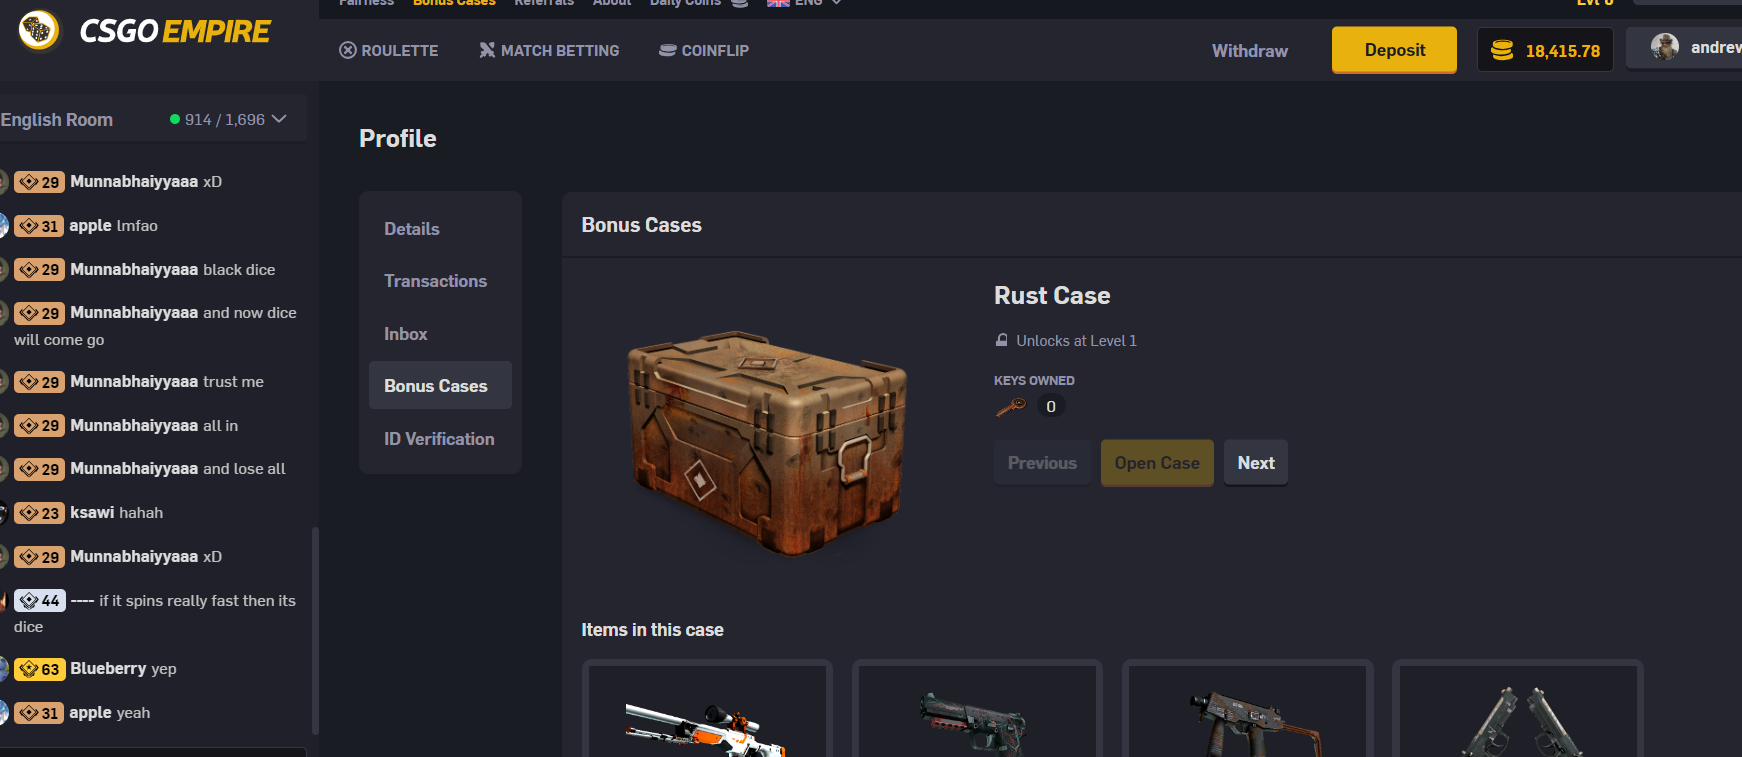 CSGOEmpire Referral Code CY10 Get Free Case Skins